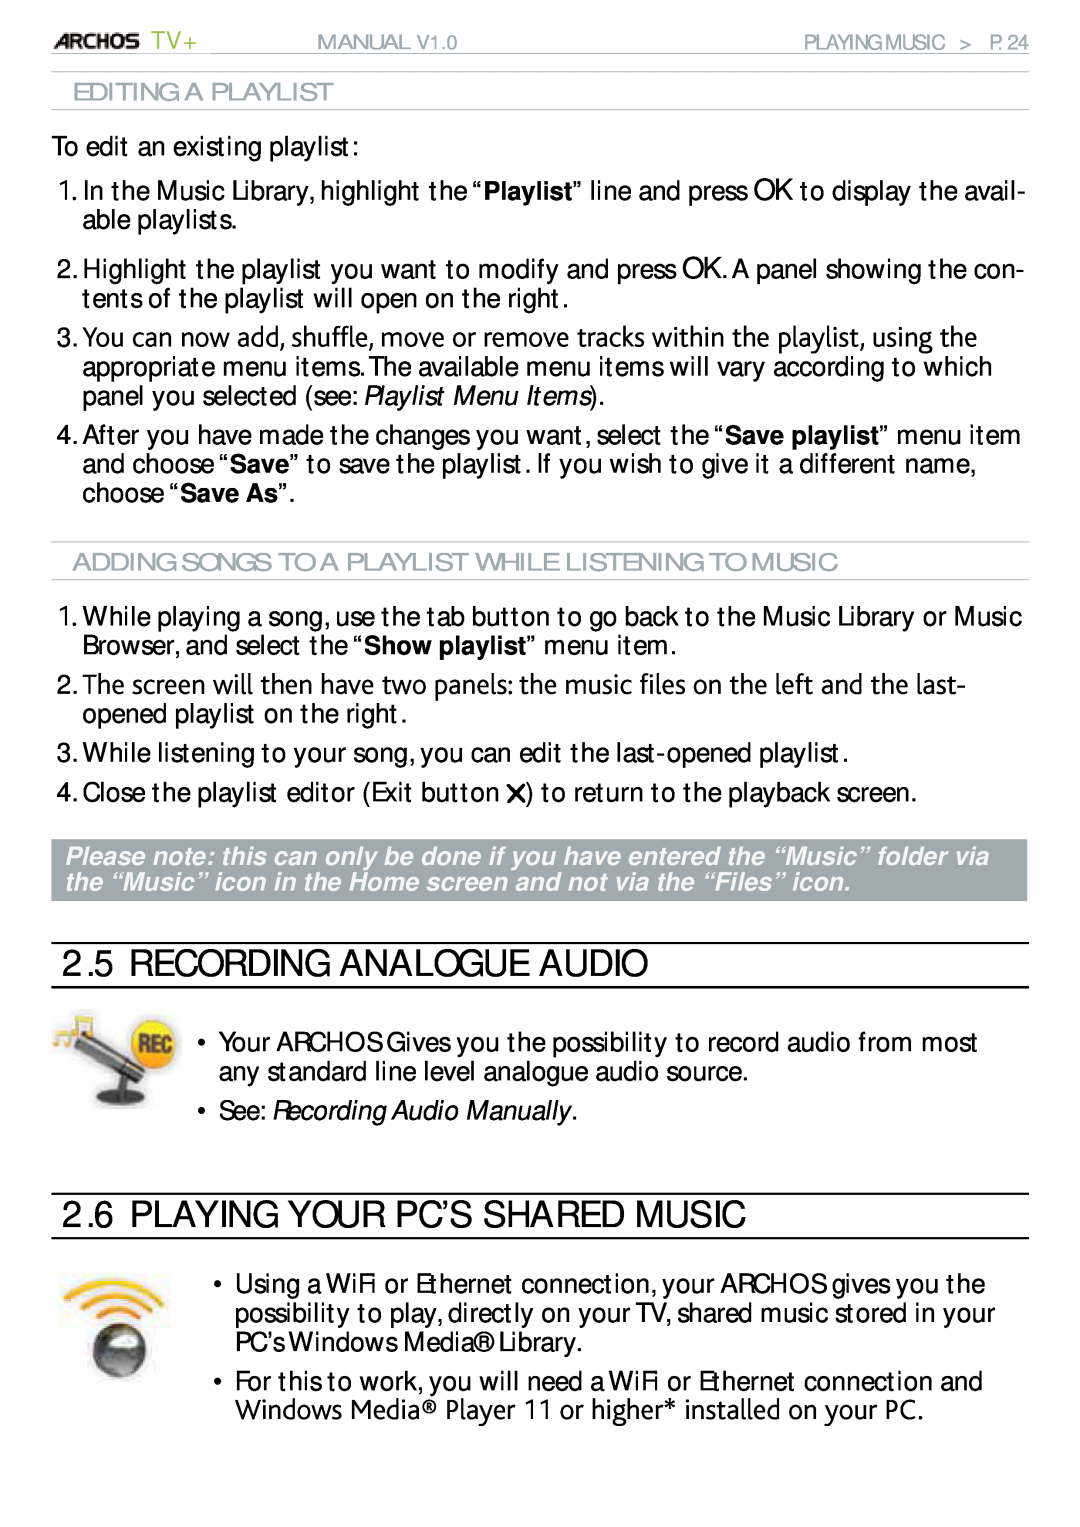 Archos 500973 user manual Recording Analogue Audio, Playing Your Pc’S Shared Music, See Recording Audio Manually 